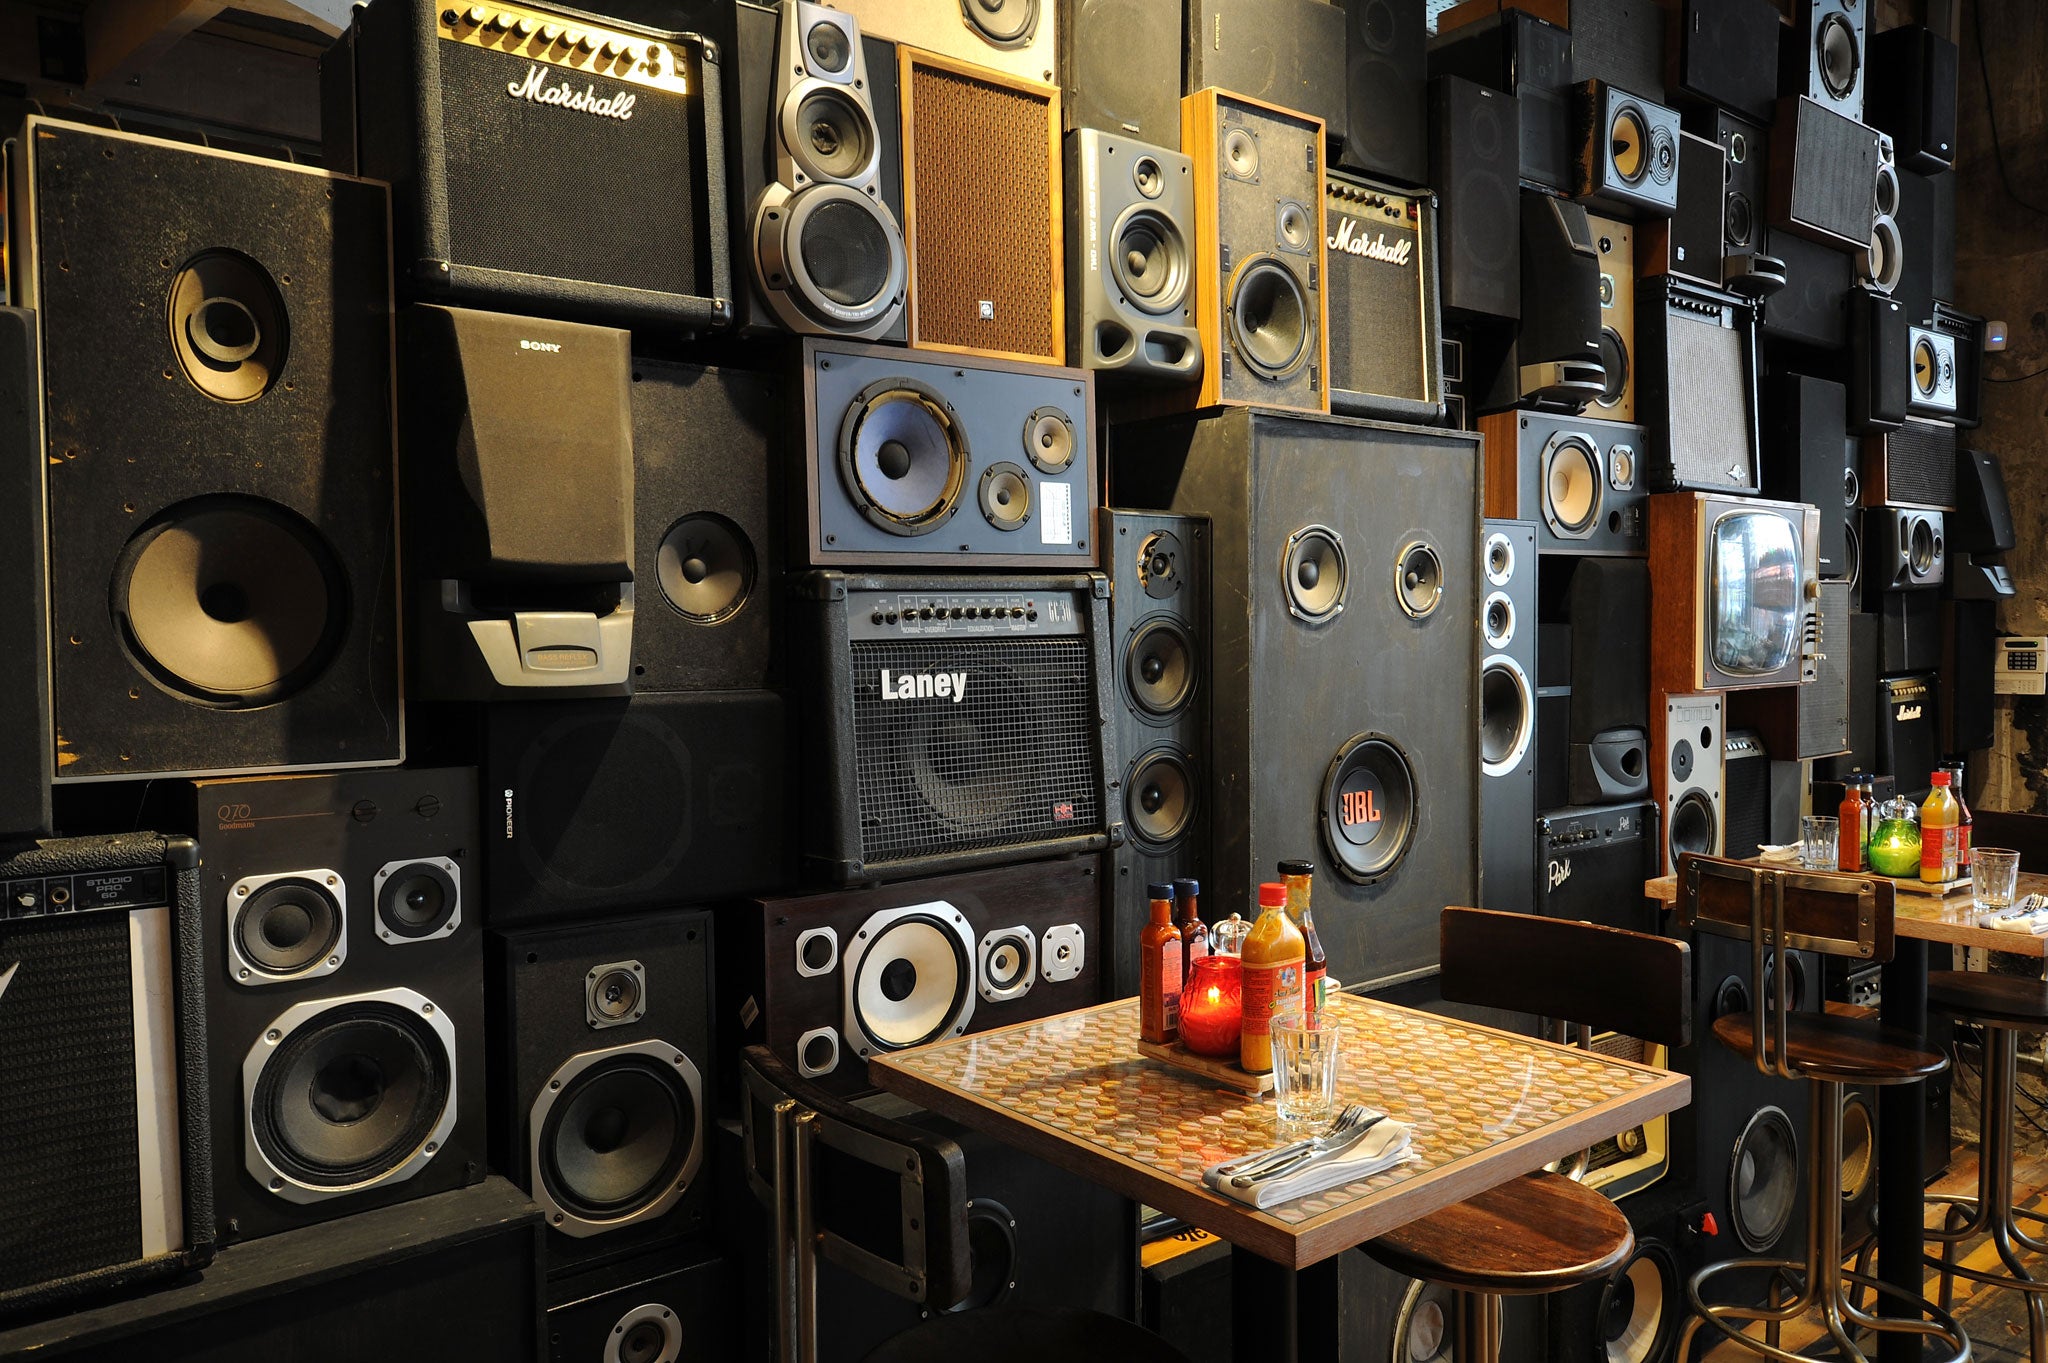 The restaurant features a wall of old hi-fi speakers and amplifiers